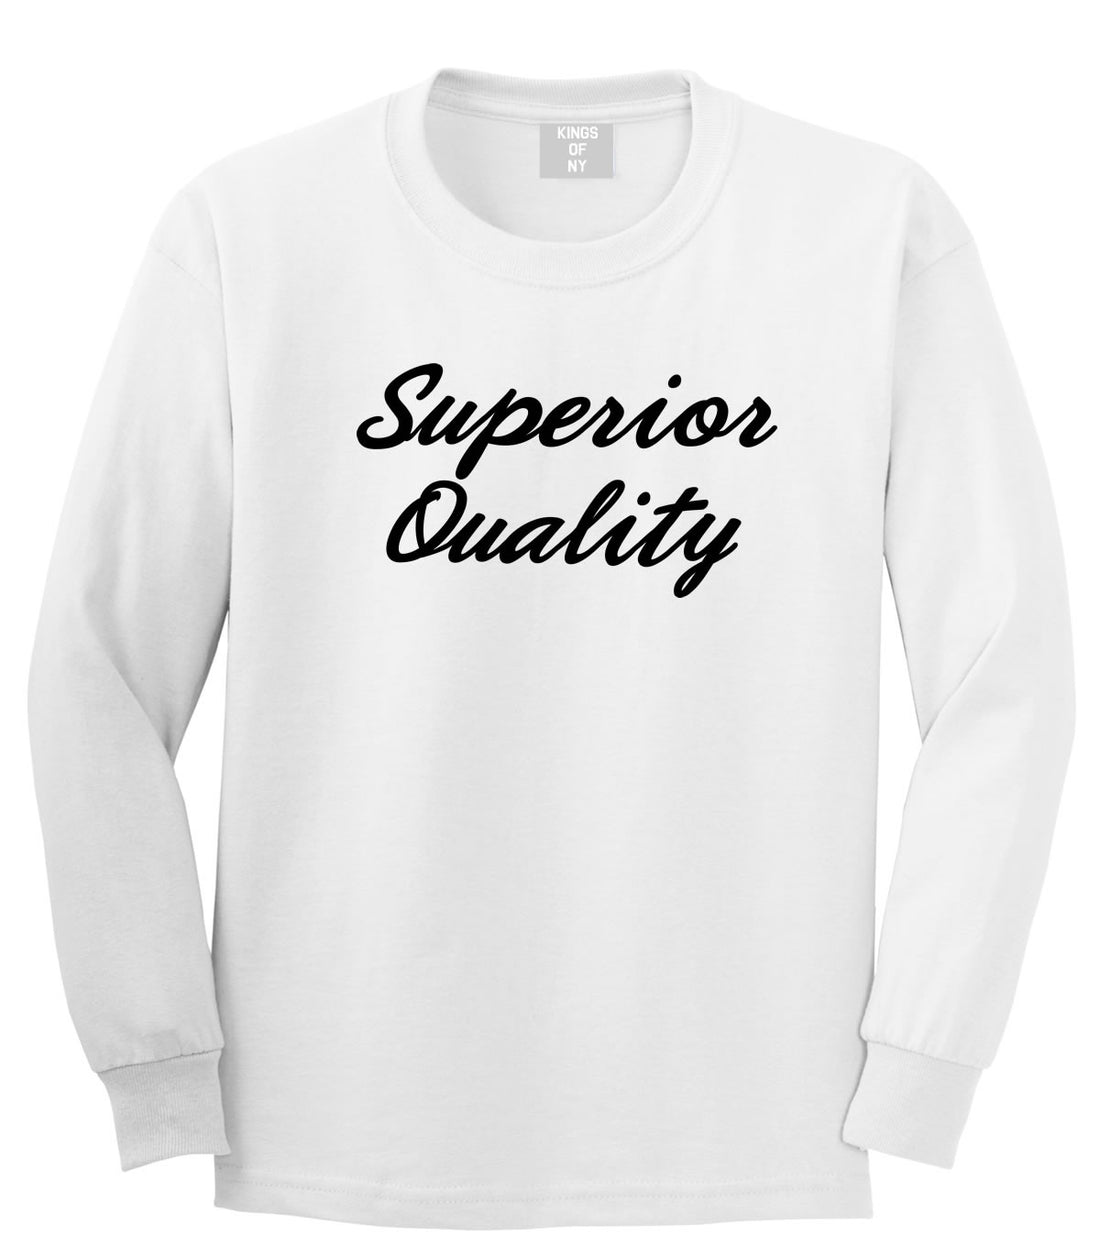 Kings Of NY Superior Quality Long Sleeve T-Shirt in White